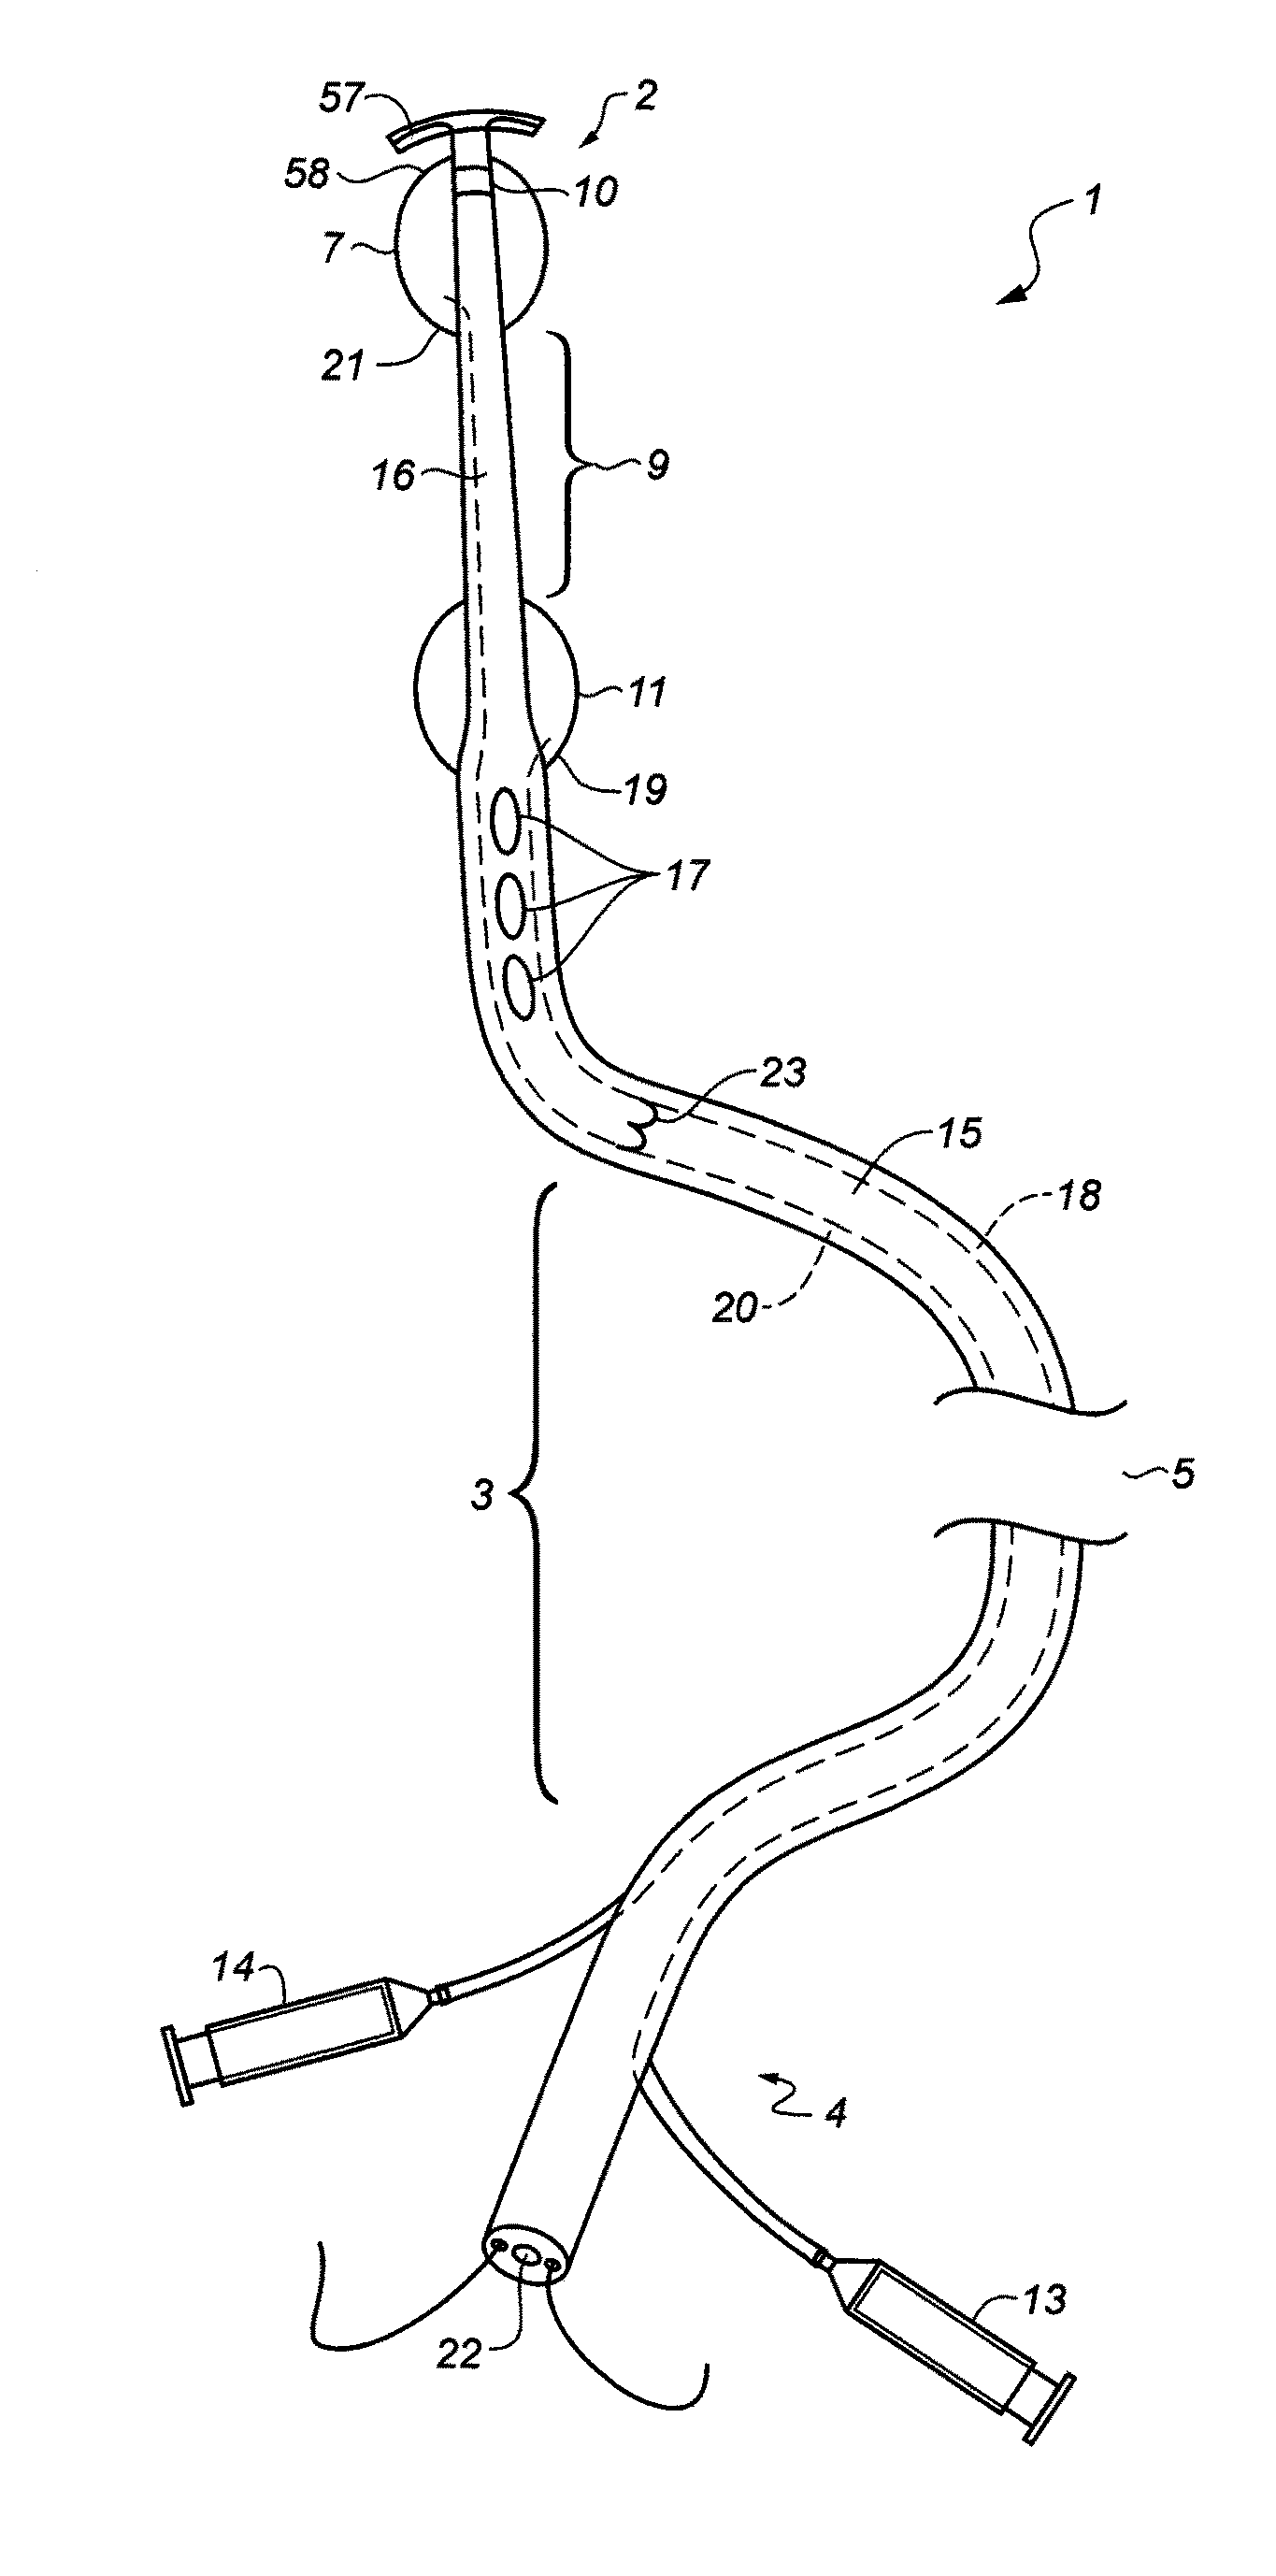 Endovascular catheter with multiple capabilities